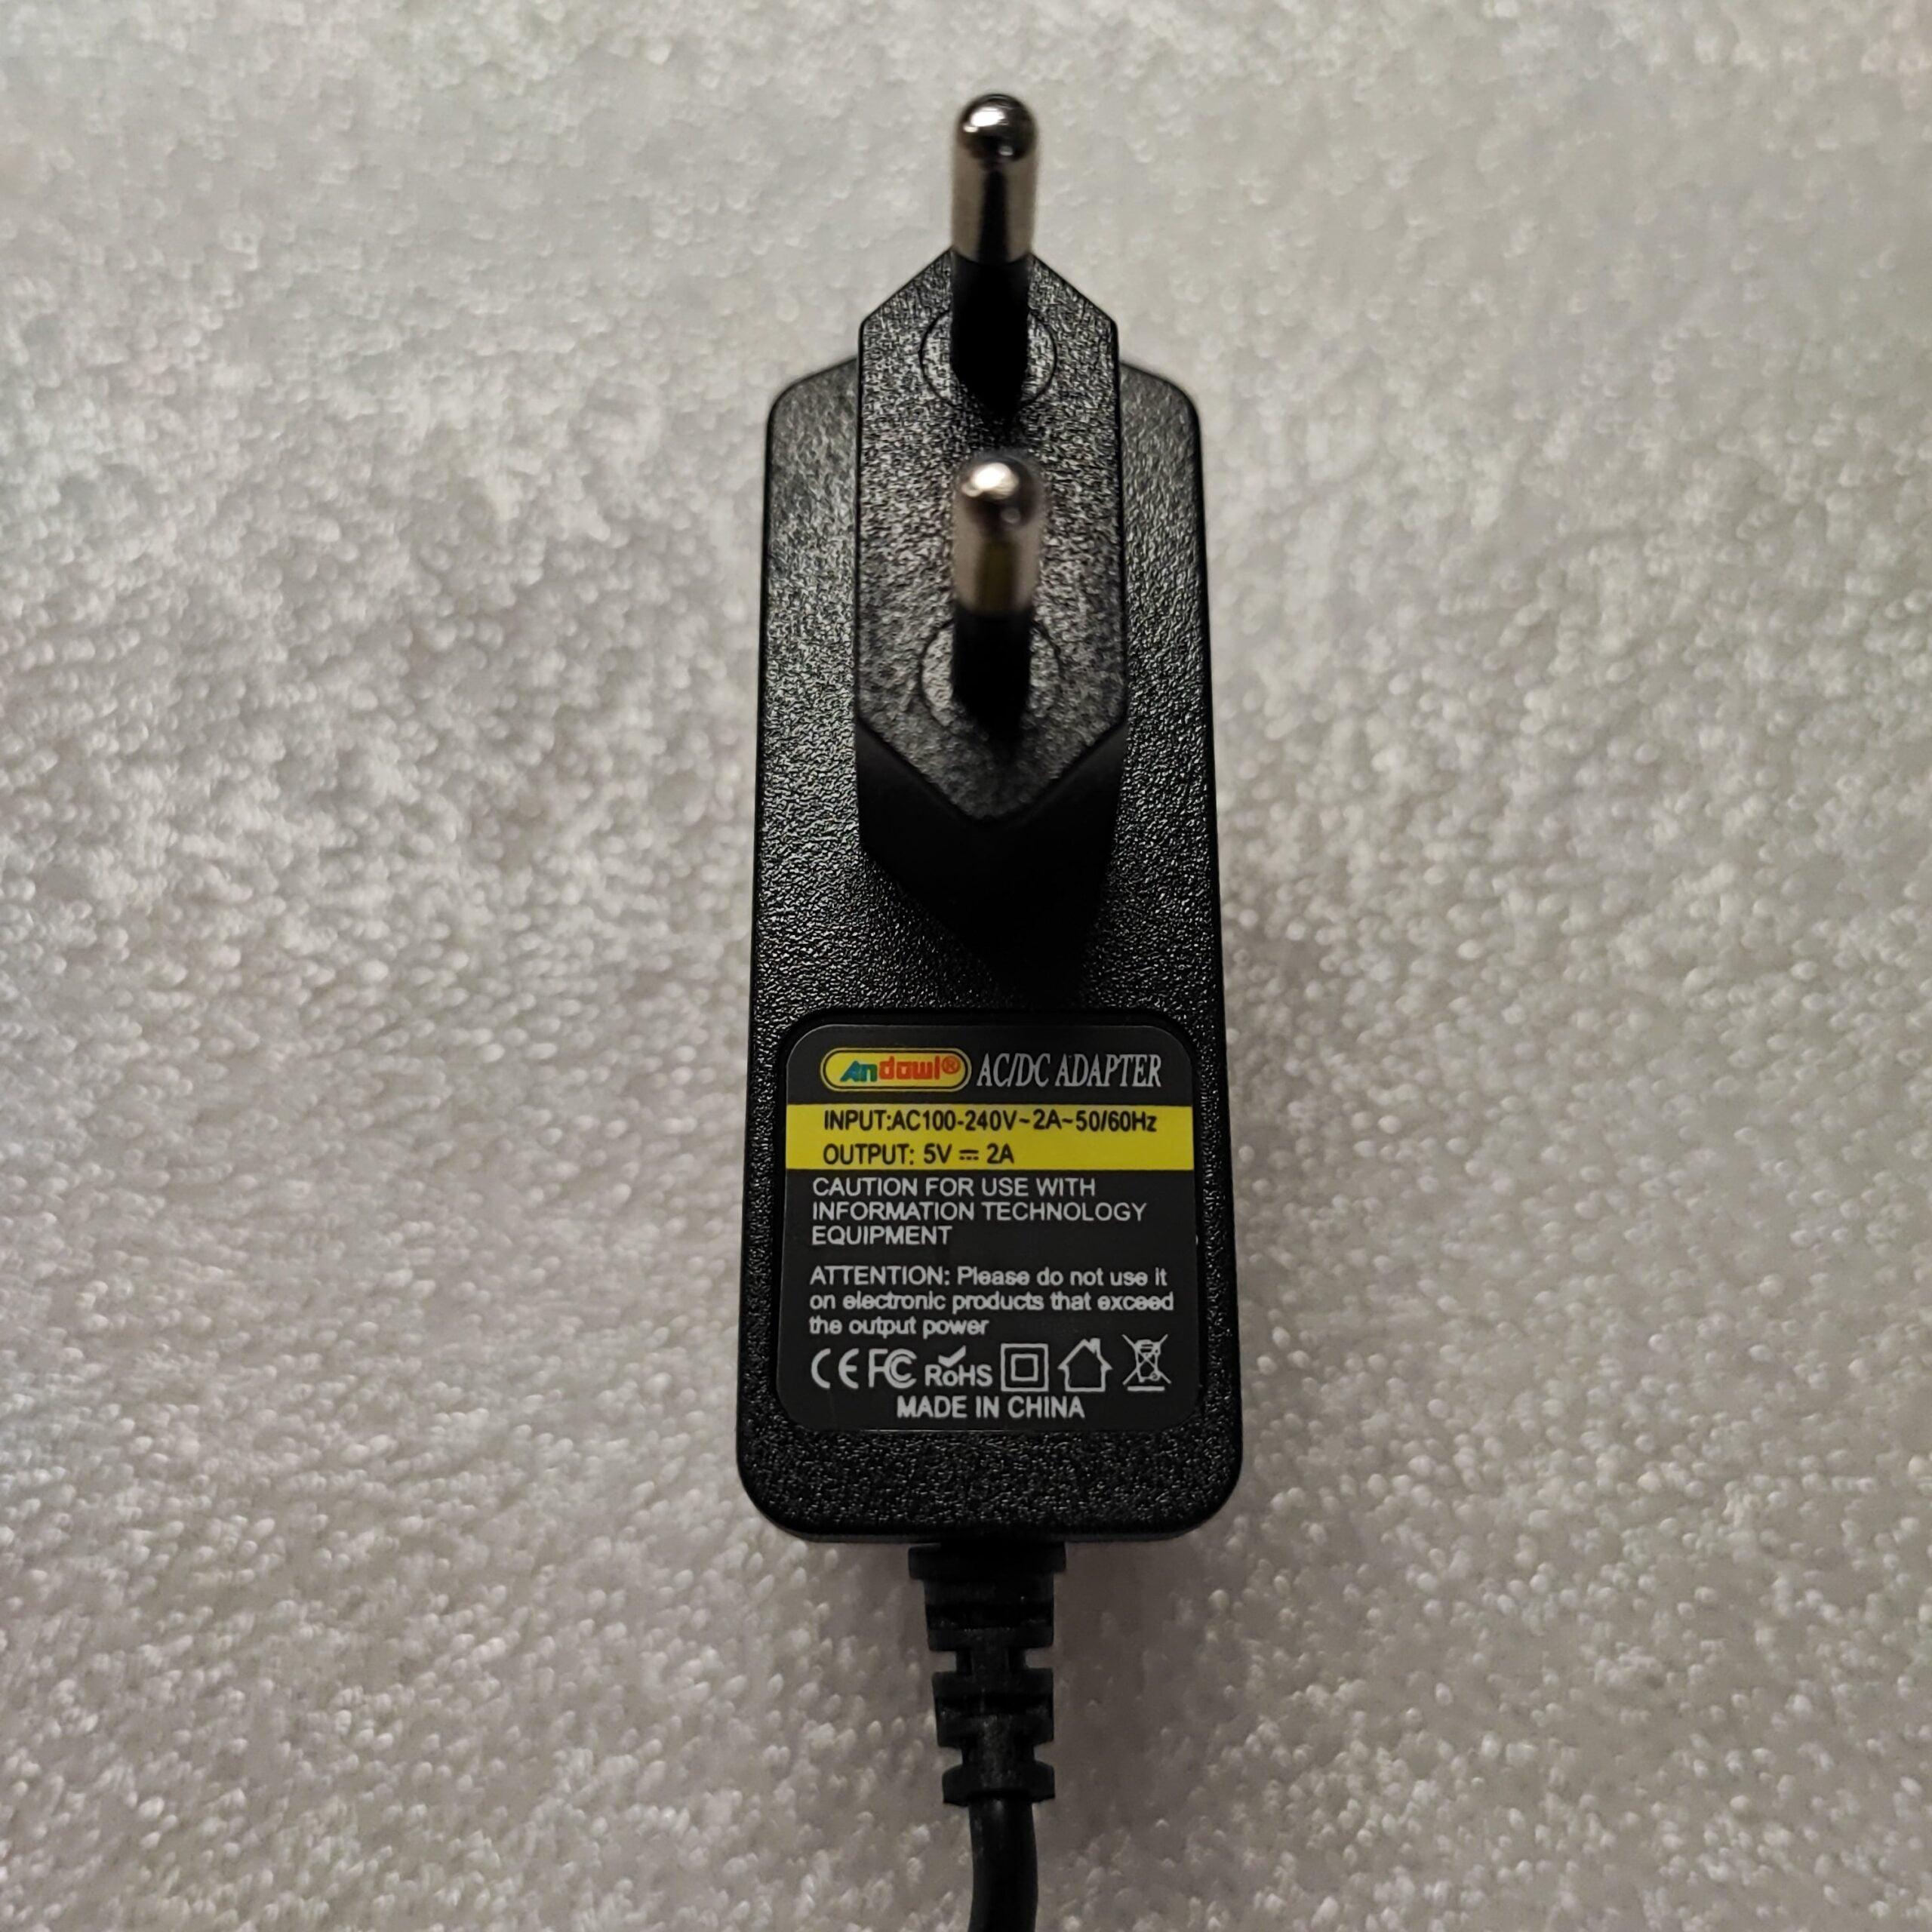 ANDOWL POWER ADAPTER (5V/2A) - Q-DC303 - NeonSales South Africa